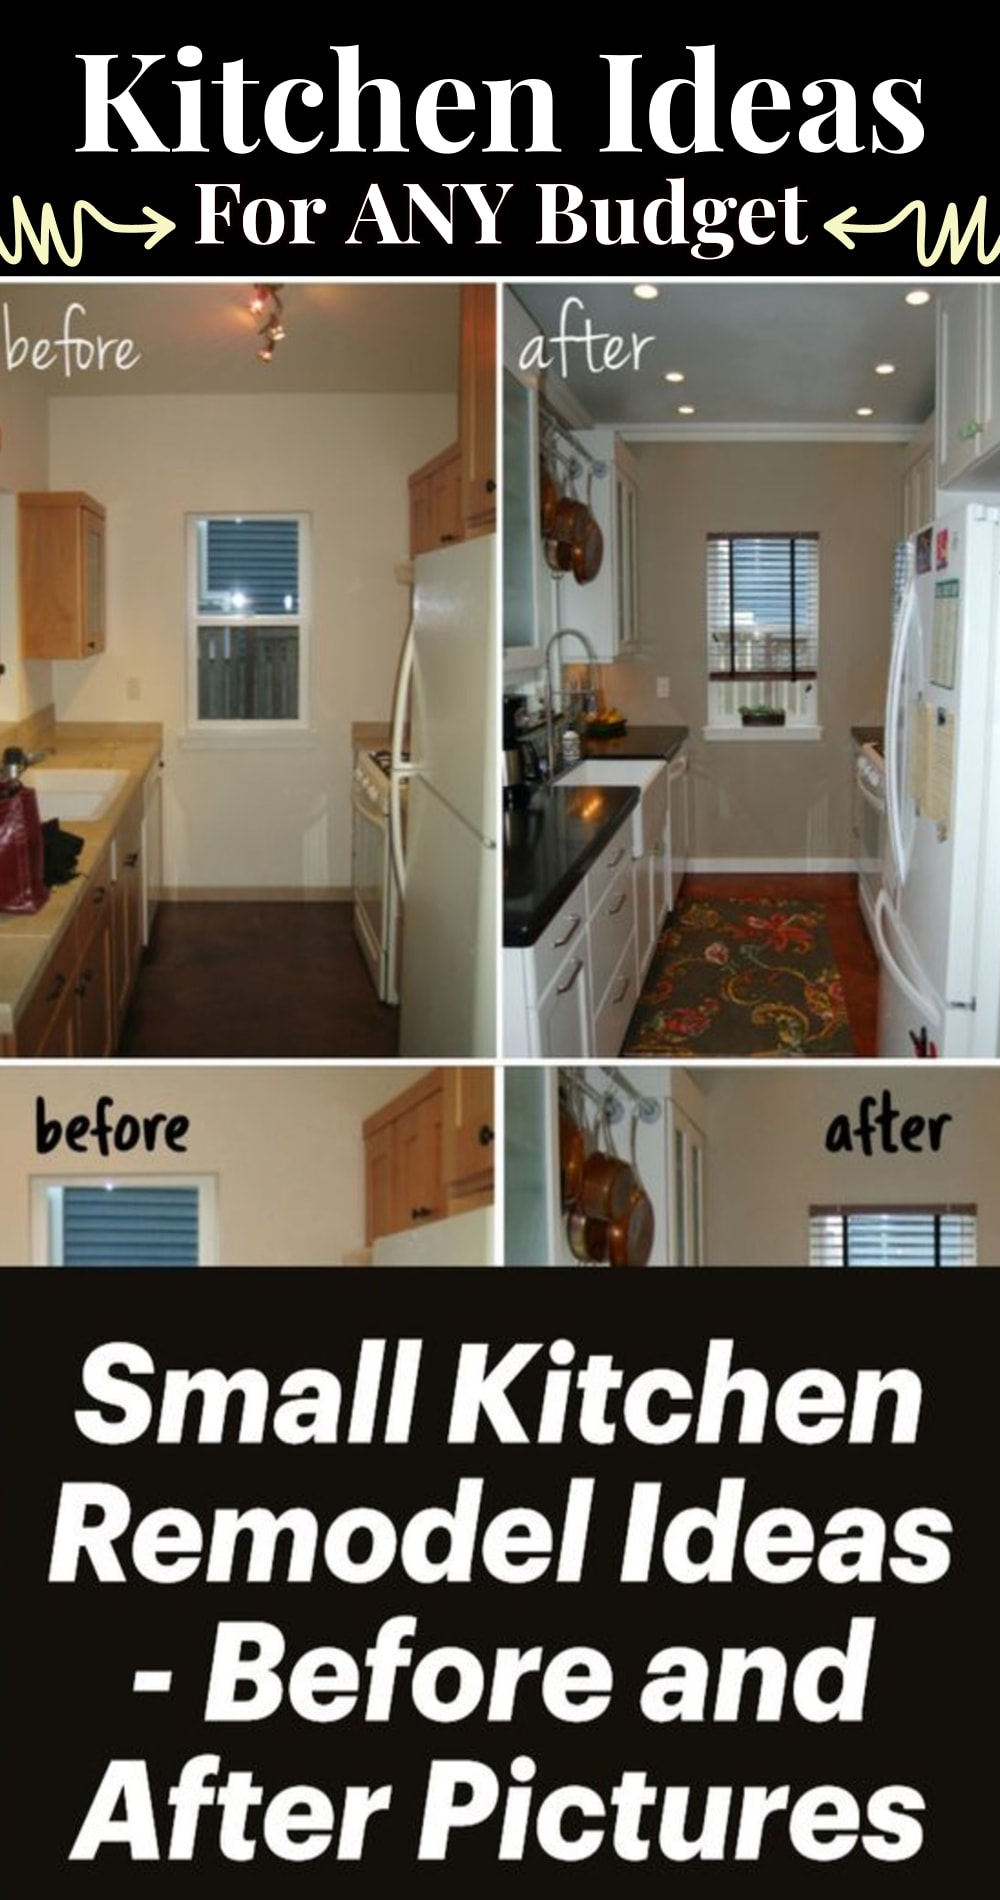 Kitchen ideas for ANY budget - before and after